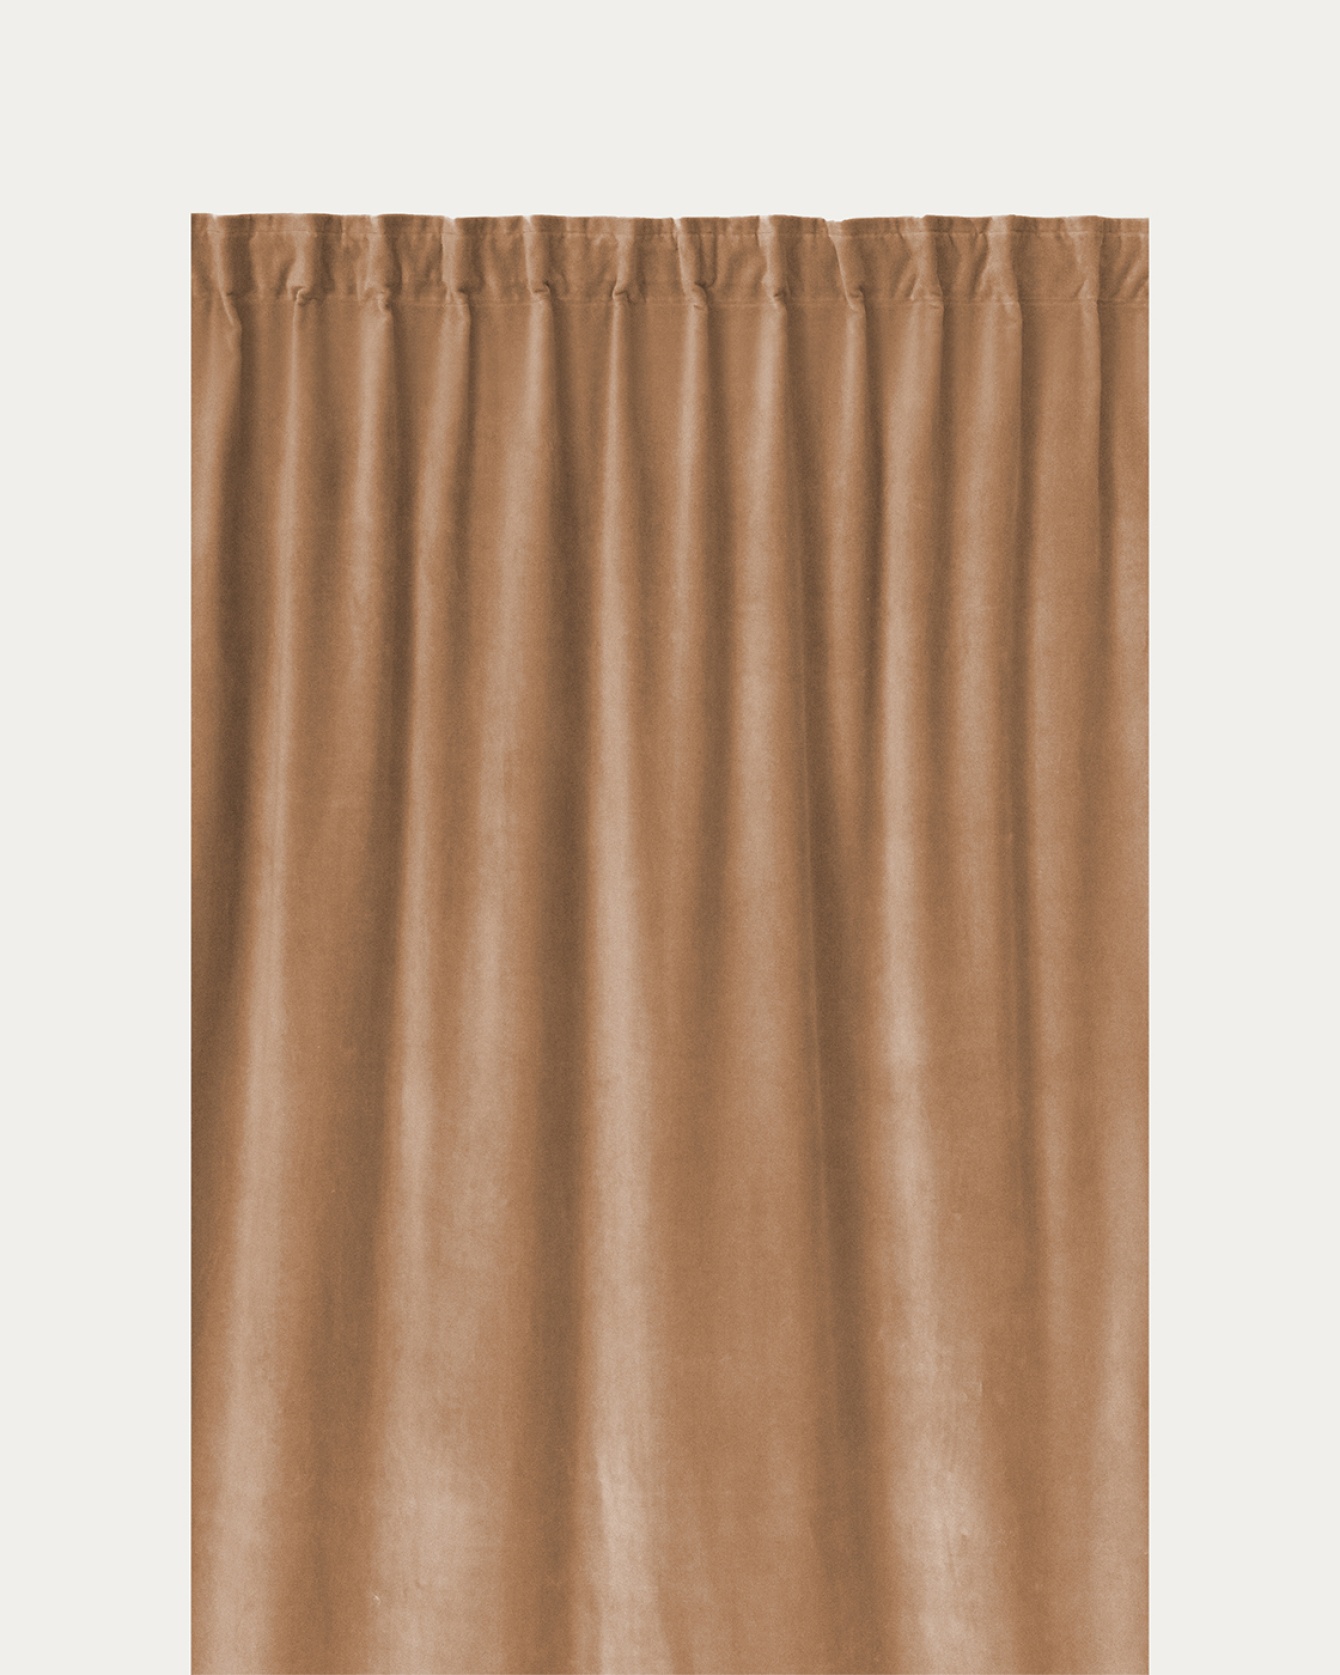 PAOLO Curtain 135x290 cm Camel brown